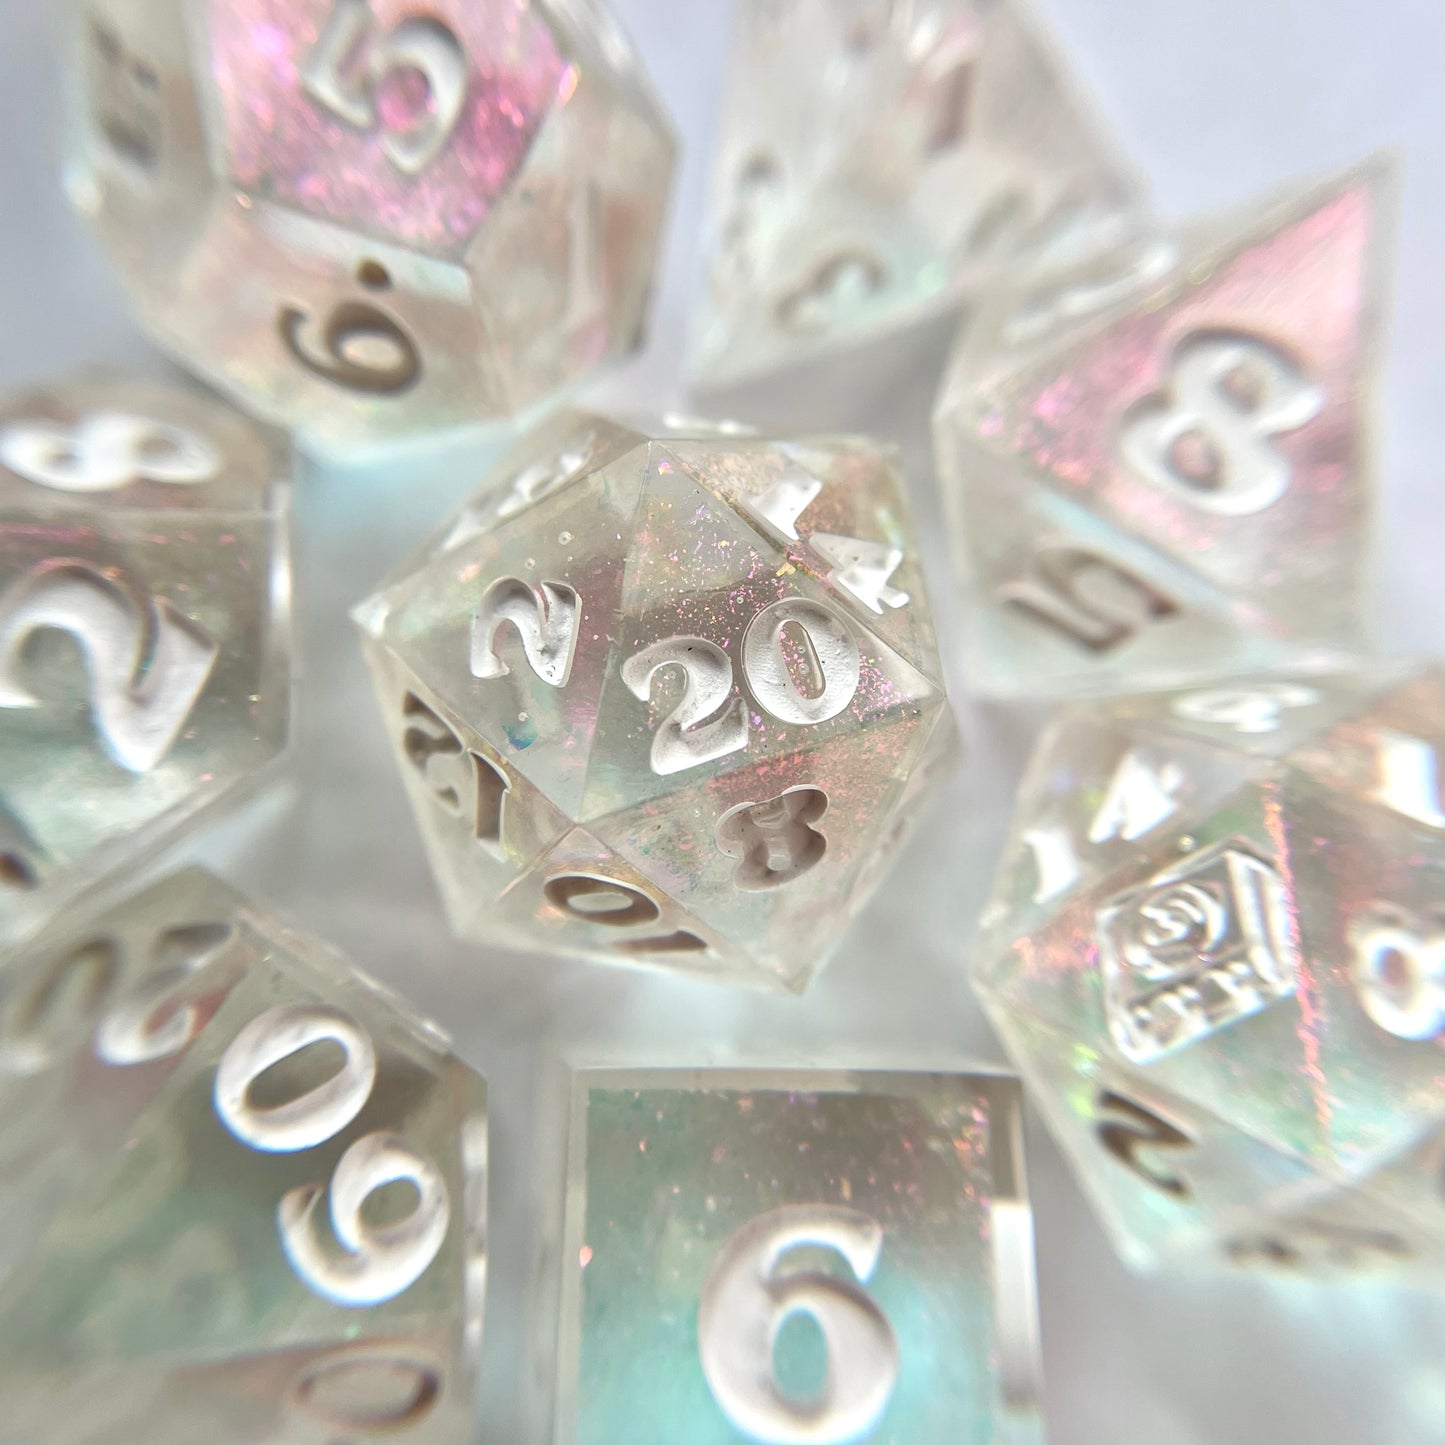 The Diviner – 7-piece Polyhedral Dice Set